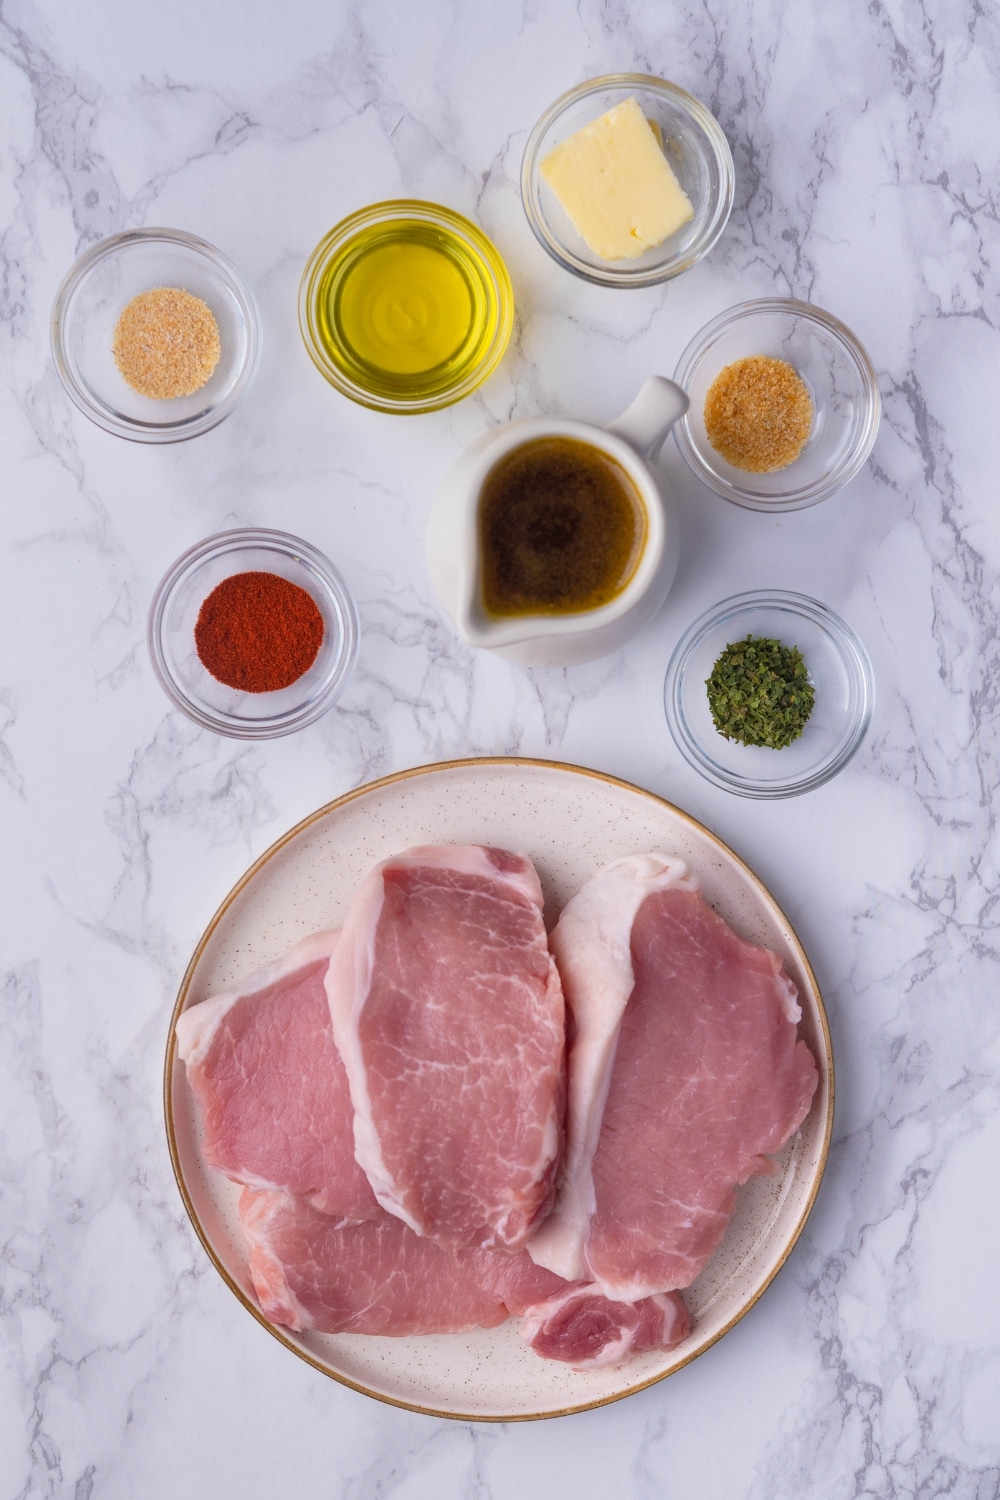 Raw pork chops on a white plate, a ceramic milk pitcher of chicken stock, and small glass bowls of butter, olive oil, garlic powder, onion powder, dried parsley, and paprika.